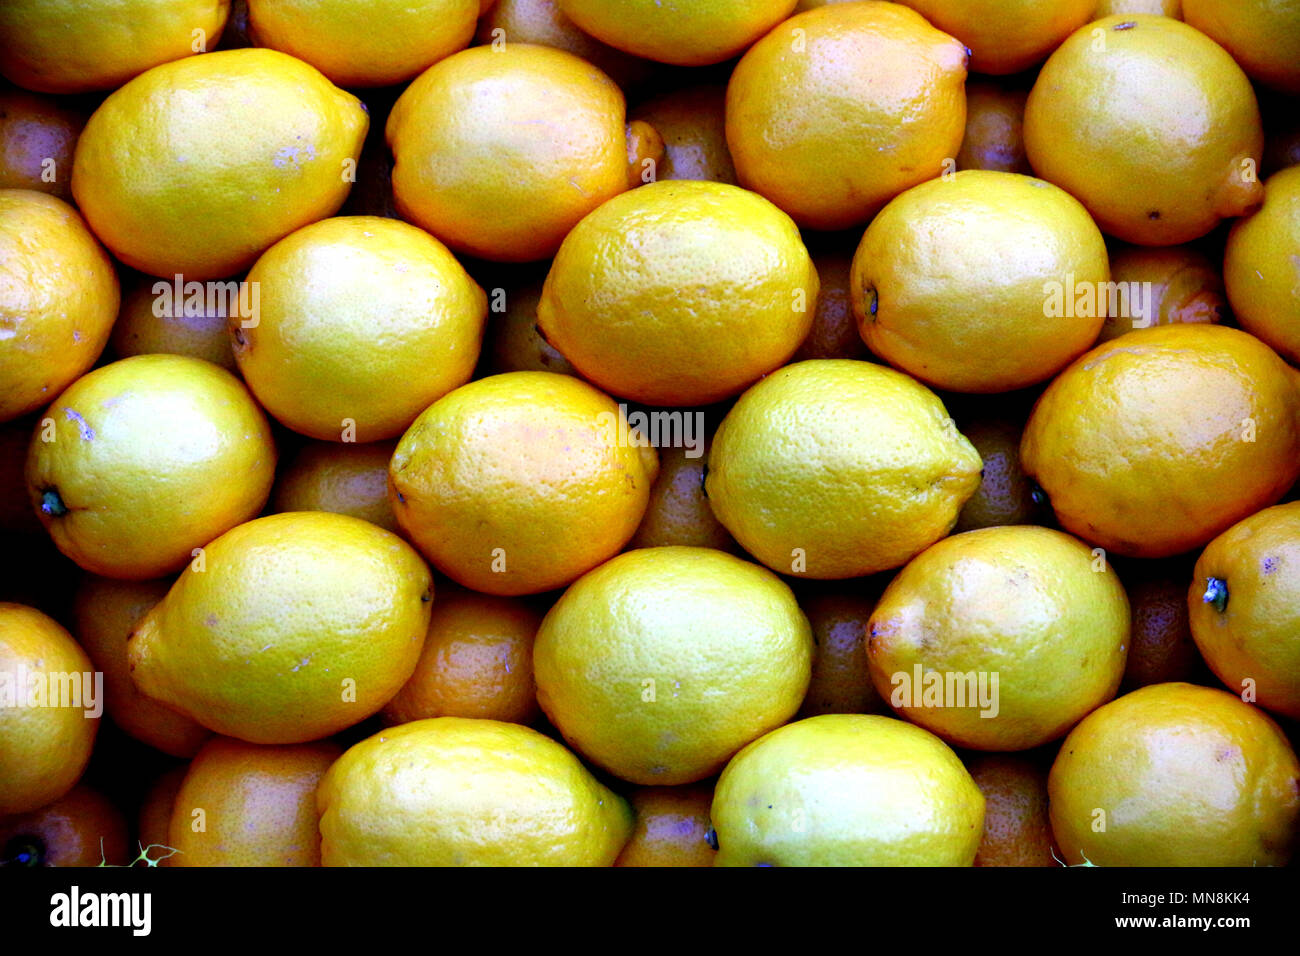 Group of fresh greek lemon from the marketplace. Healthy and full of vitamin C. Stock Photo